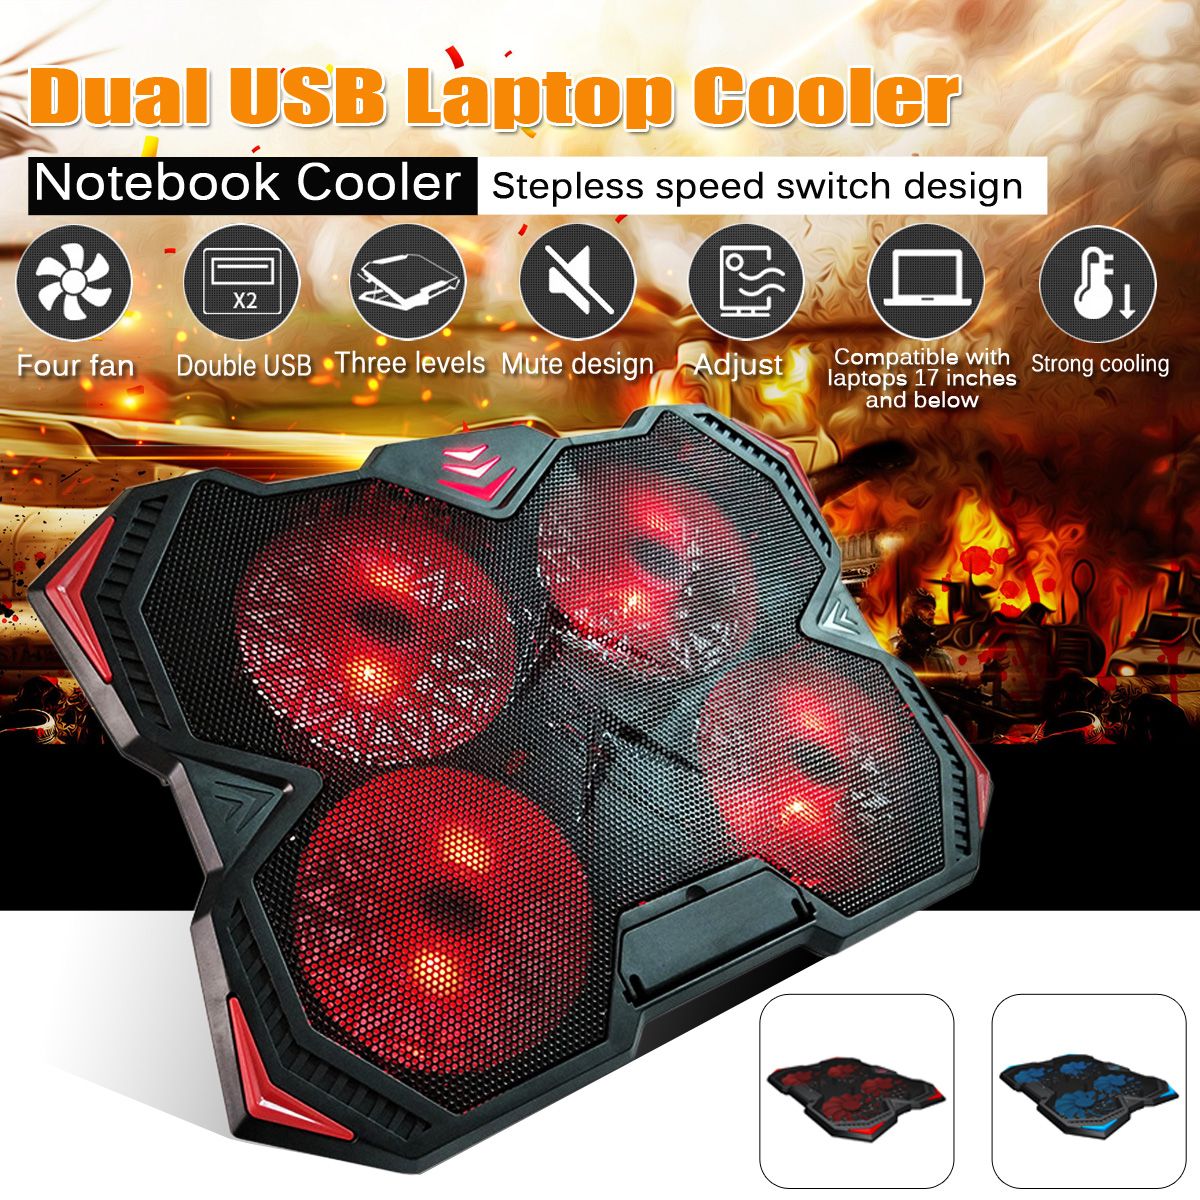 Laptop-Cooling-Pads-4-Fans-3-Levels-Of-Lifting-USB-Port-Air-Cooling-Noiseless-Stand-For-17-inches-an-1669559